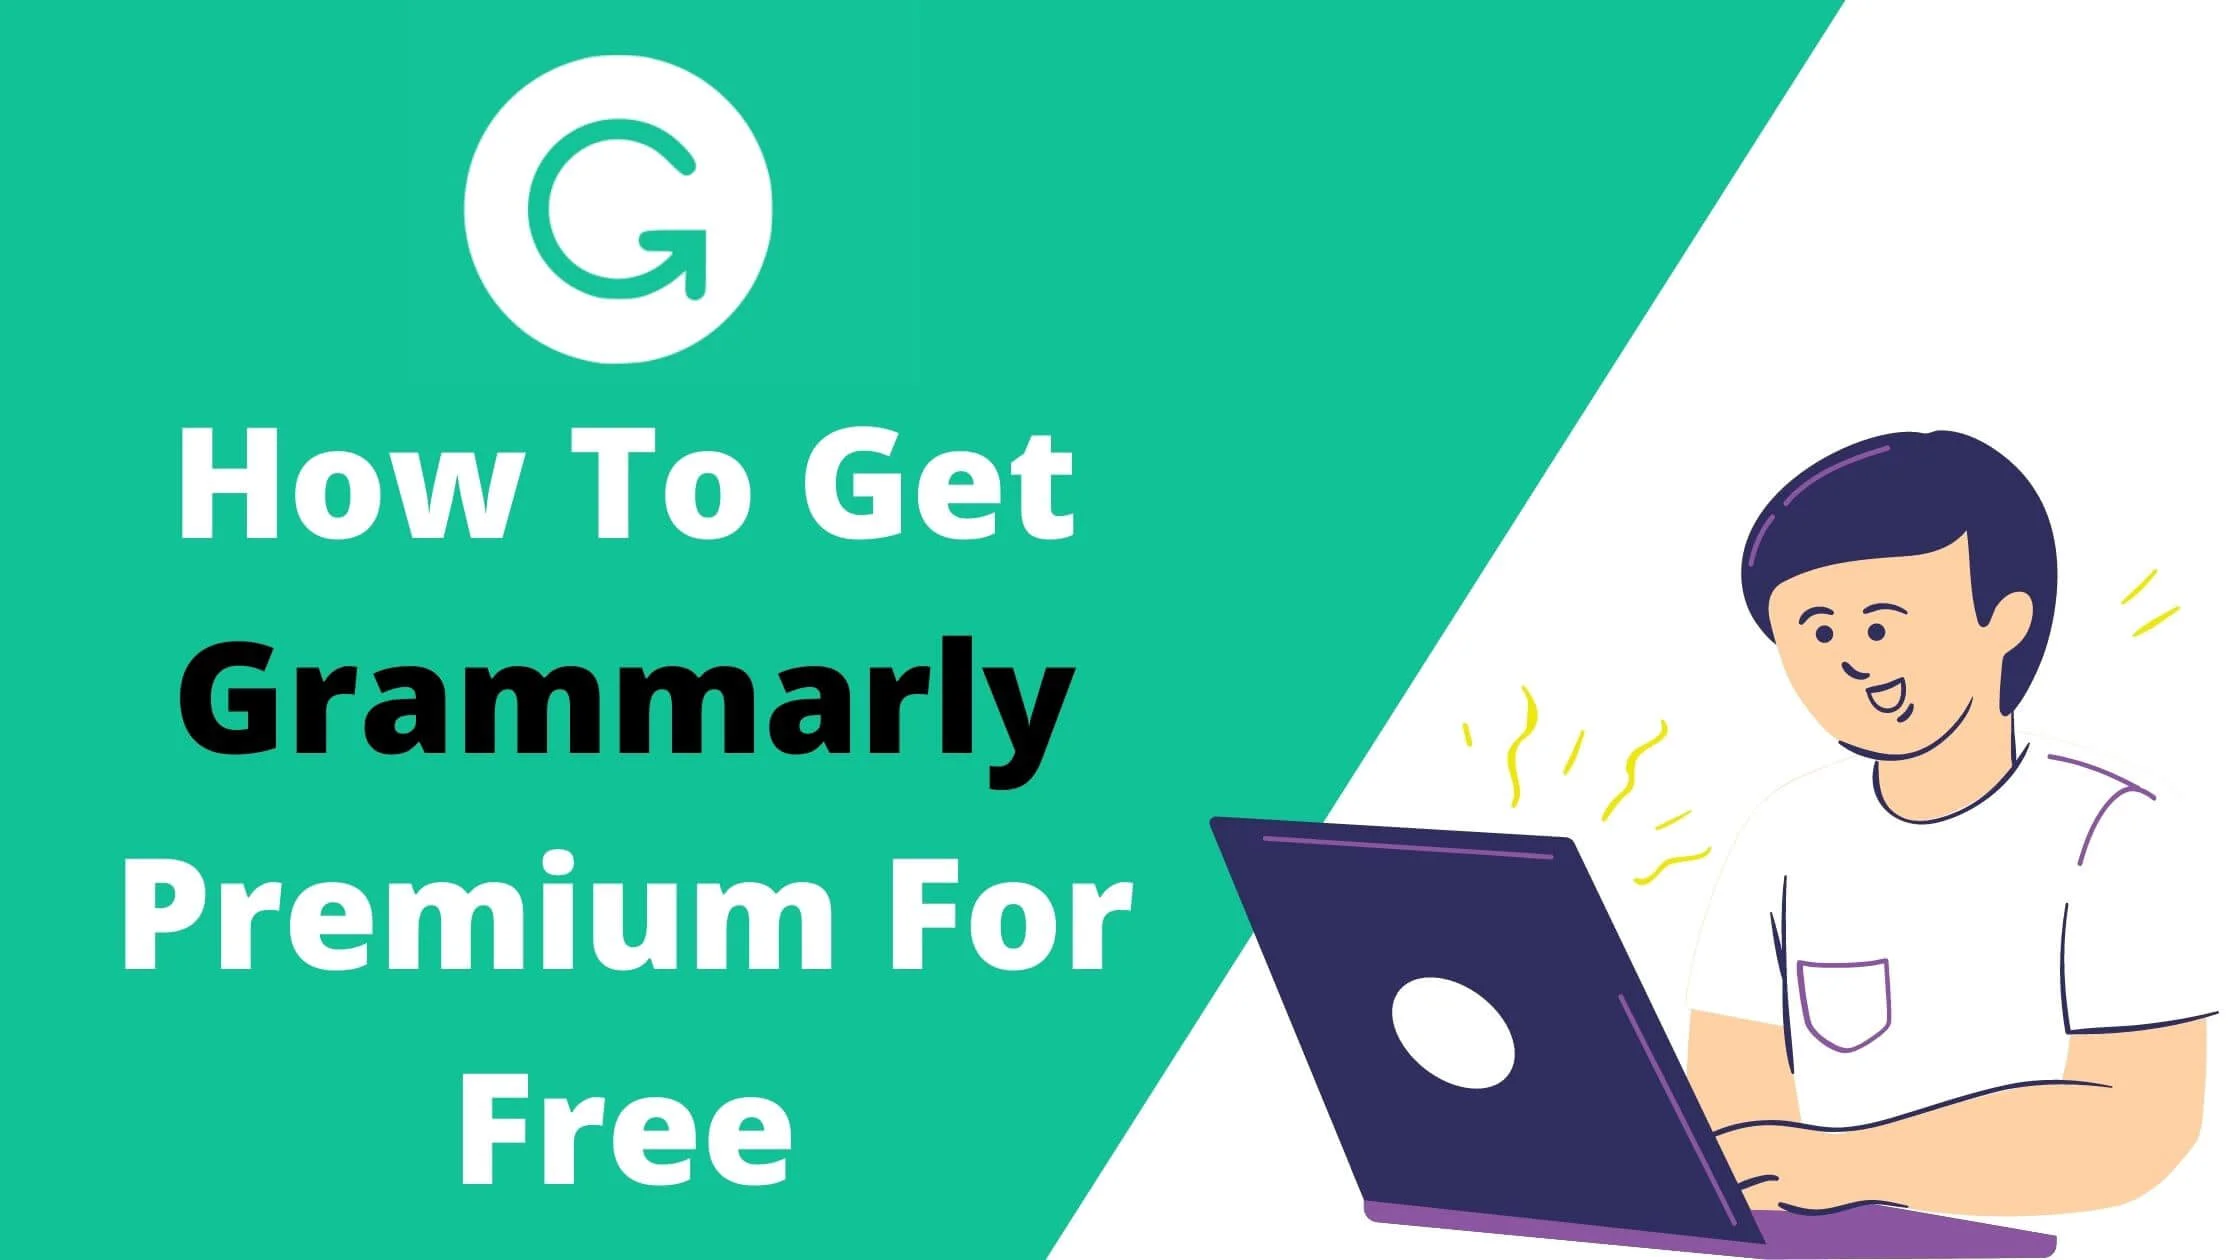 How To Get Grammarly Premium For Free